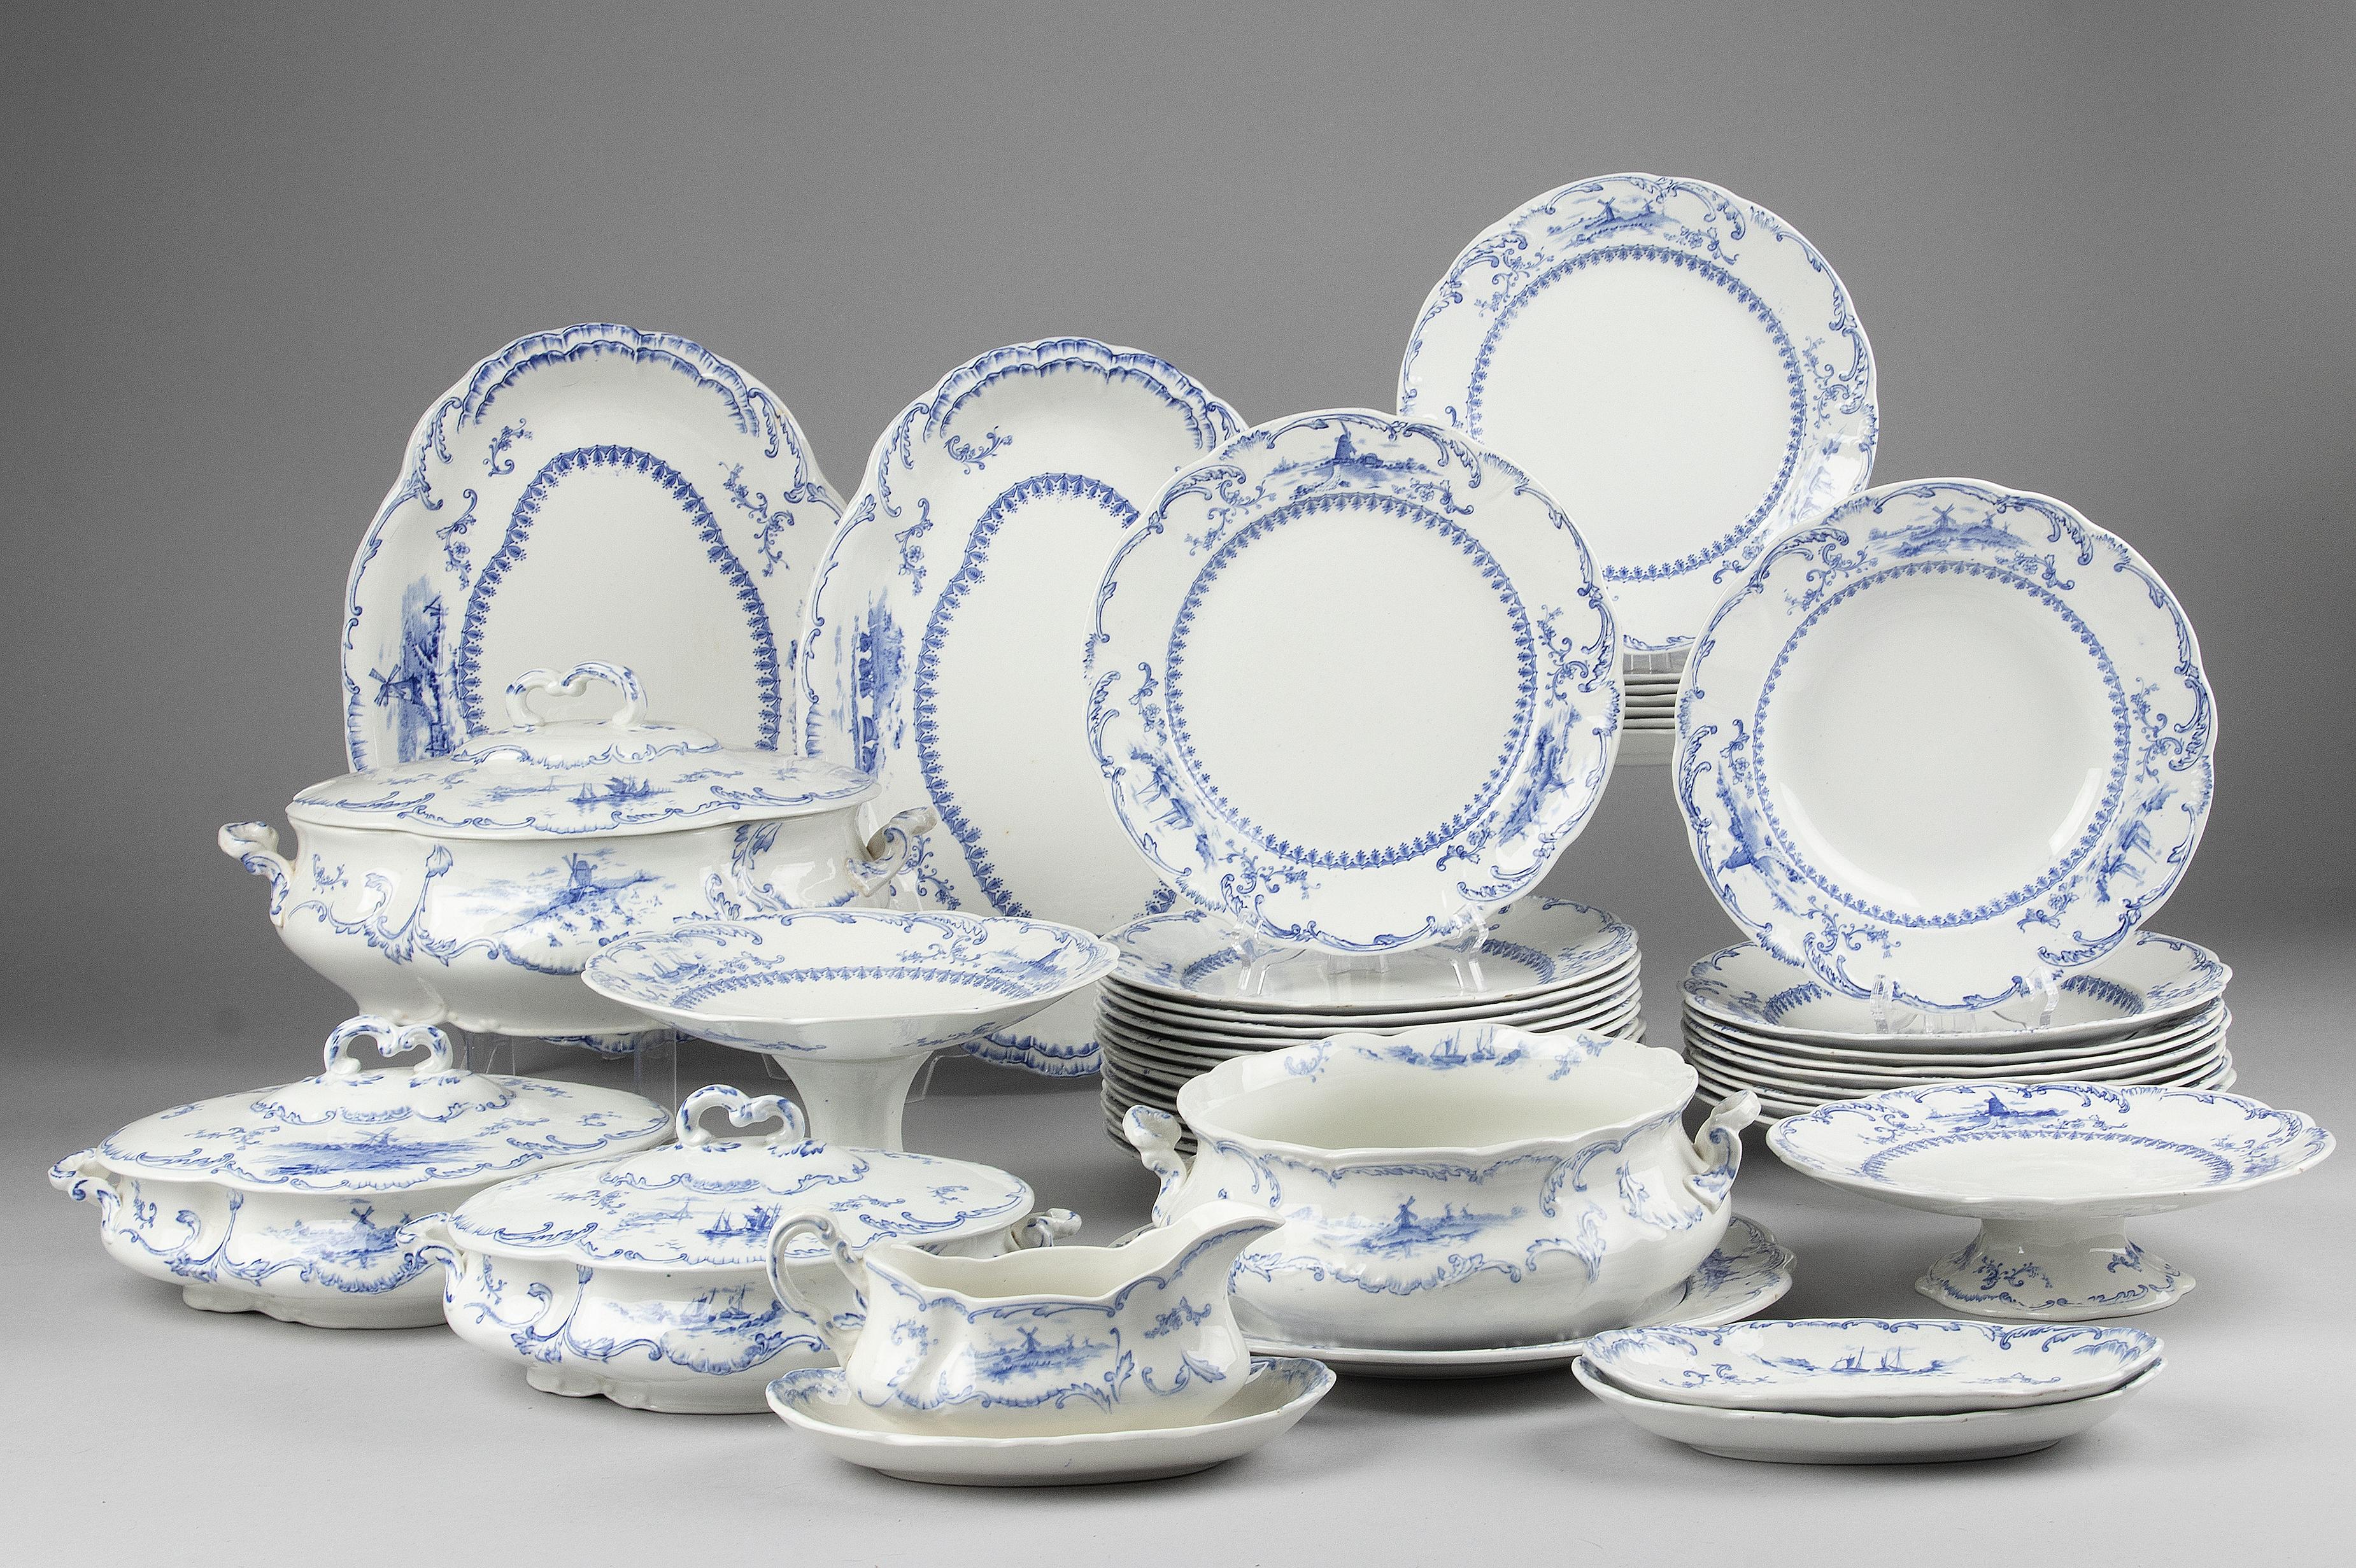 Beautiful antique table service from the English maker Ridgways. The service is decorated with a beautiful Delft pattern, with windmills and graceful ornaments. The service dates from approximately 1880-1890.
The composition of the set is as